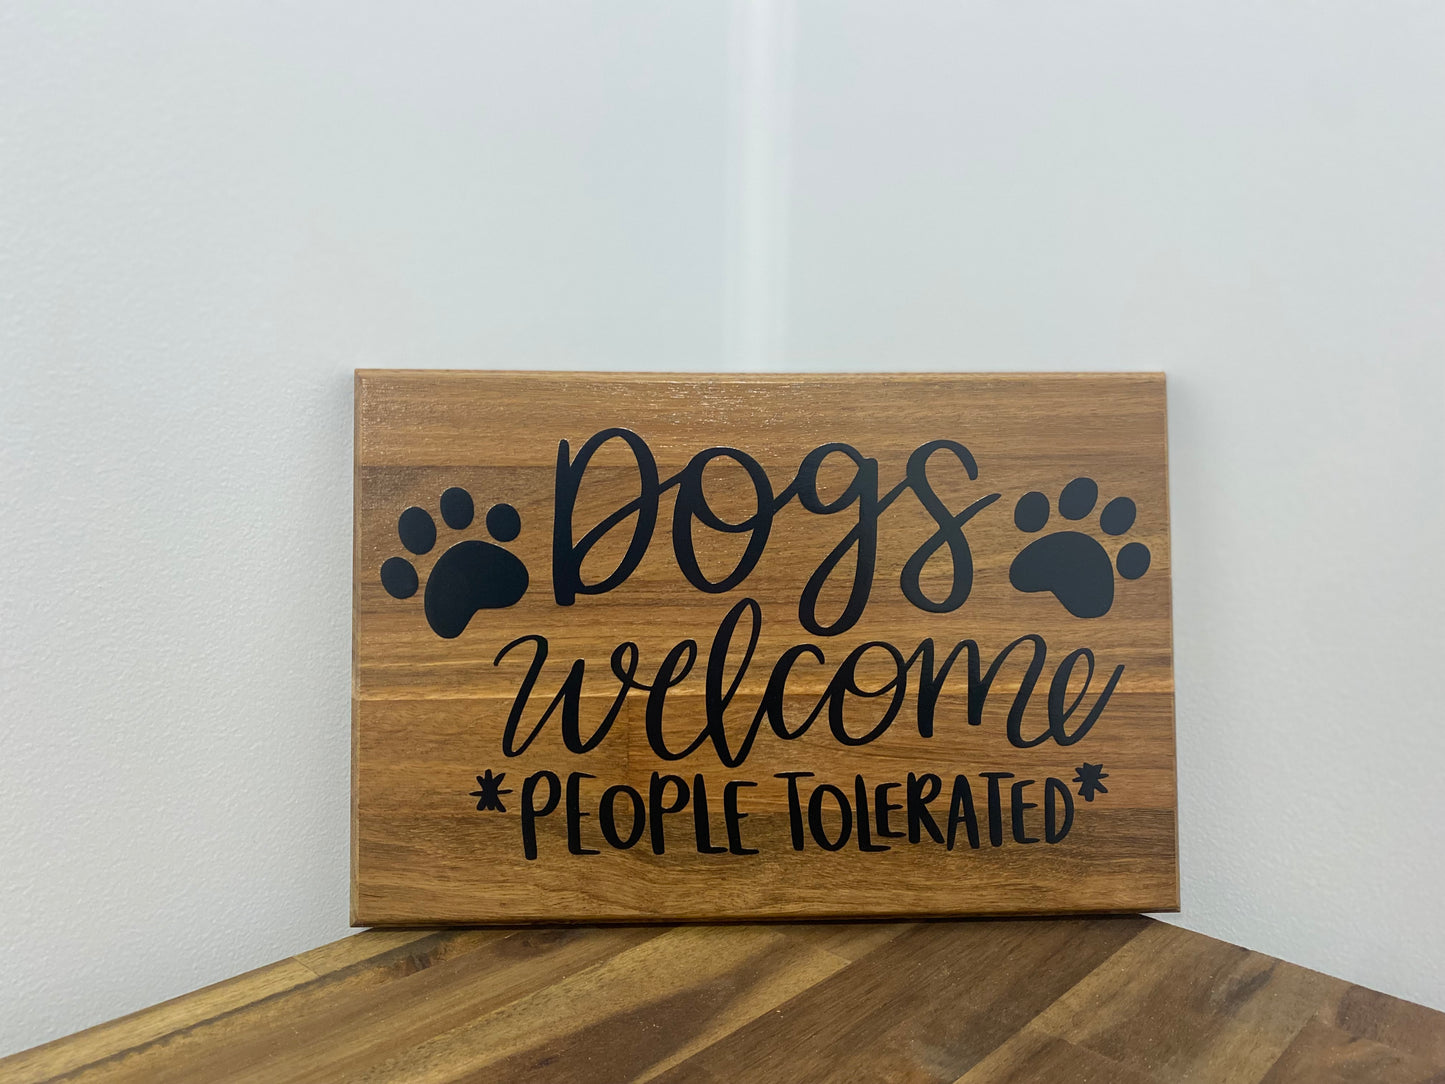 Dogs welcome, people tolerated | 20cm x 30cm